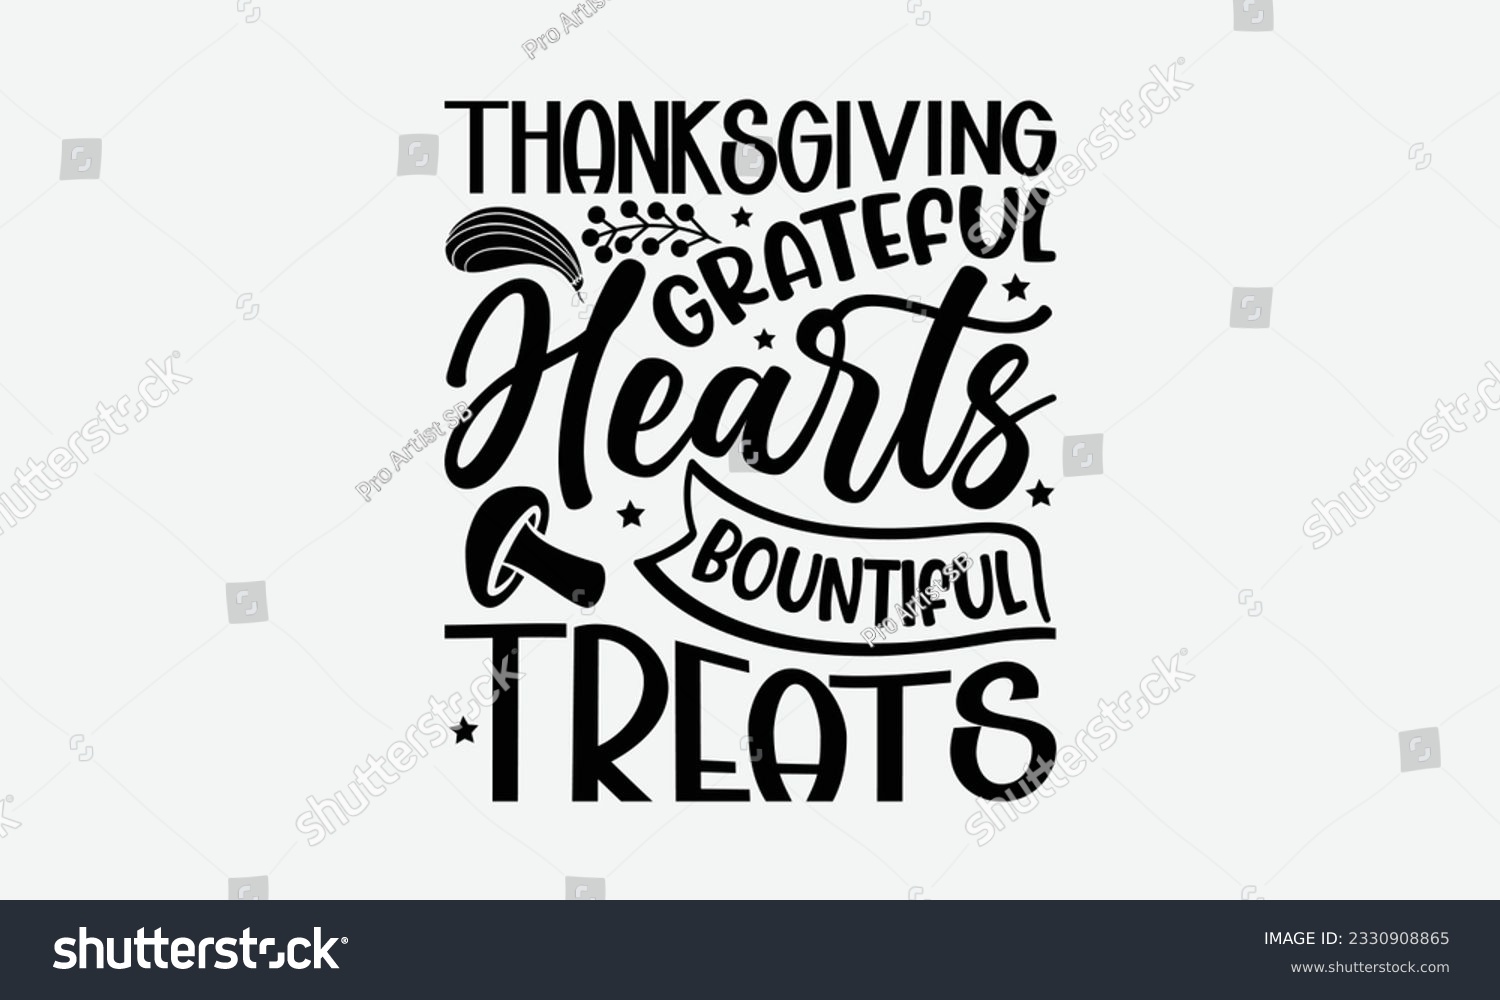 SVG of Thanksgiving Grateful Hearts Bountiful Treats - Thanksgiving T-shirt Design Template, Thanksgiving Quotes File, Hand Drawn Lettering Phrase, SVG Files for Cutting Cricut and Silhouette. svg